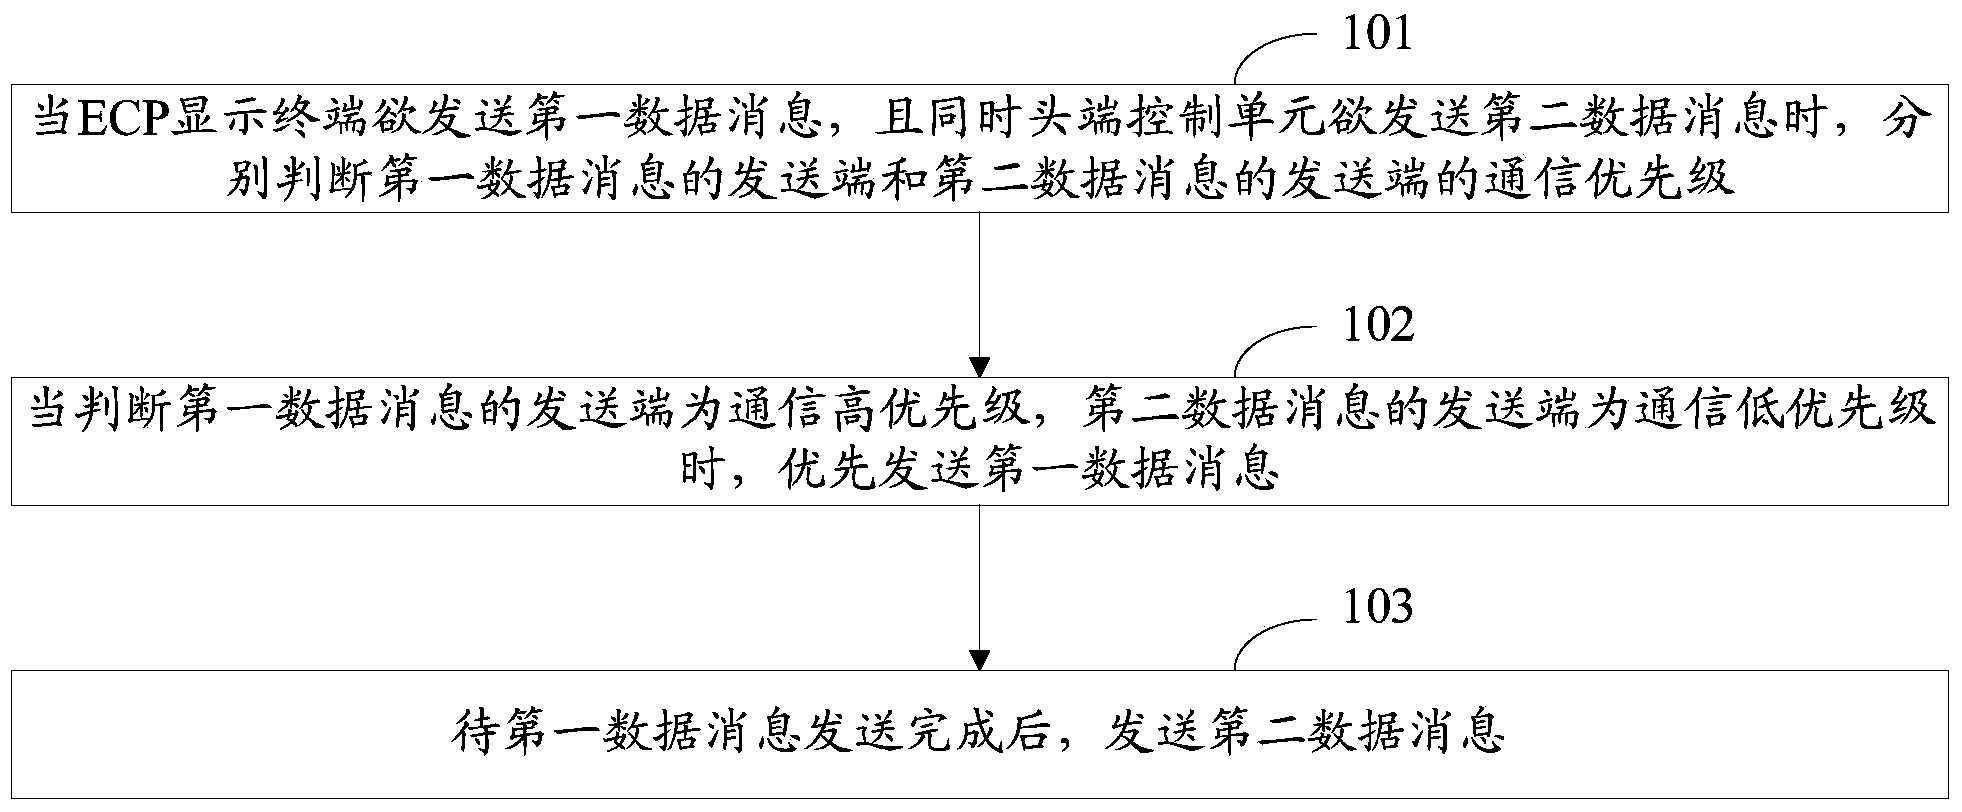 Method and device for communication between ECP system display terminal and head end control unit